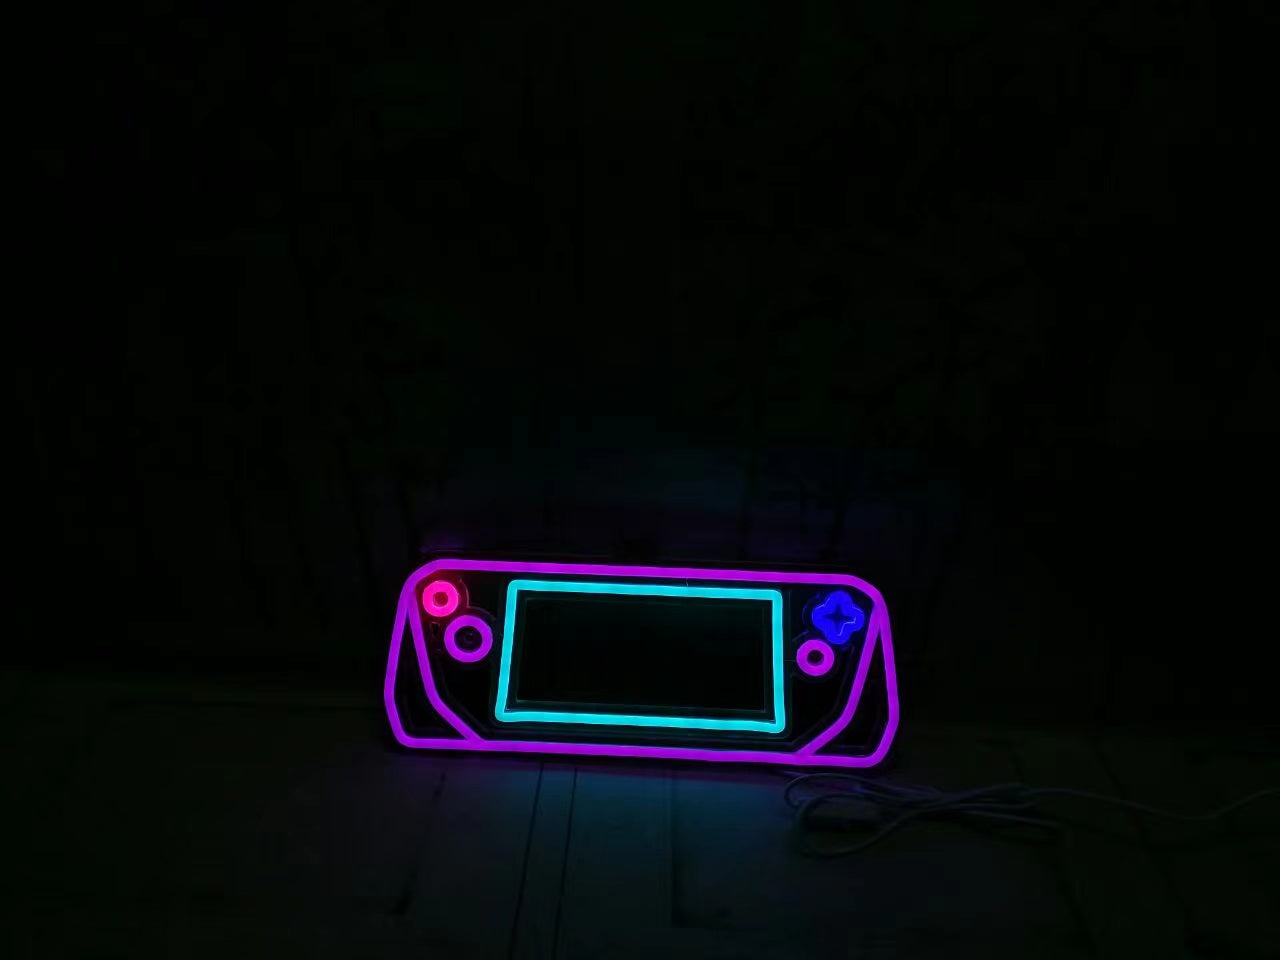 ROG Ally LED Neon Sign with Switch and USB Plug, Gamer's Best Gift, 400mm*146mm